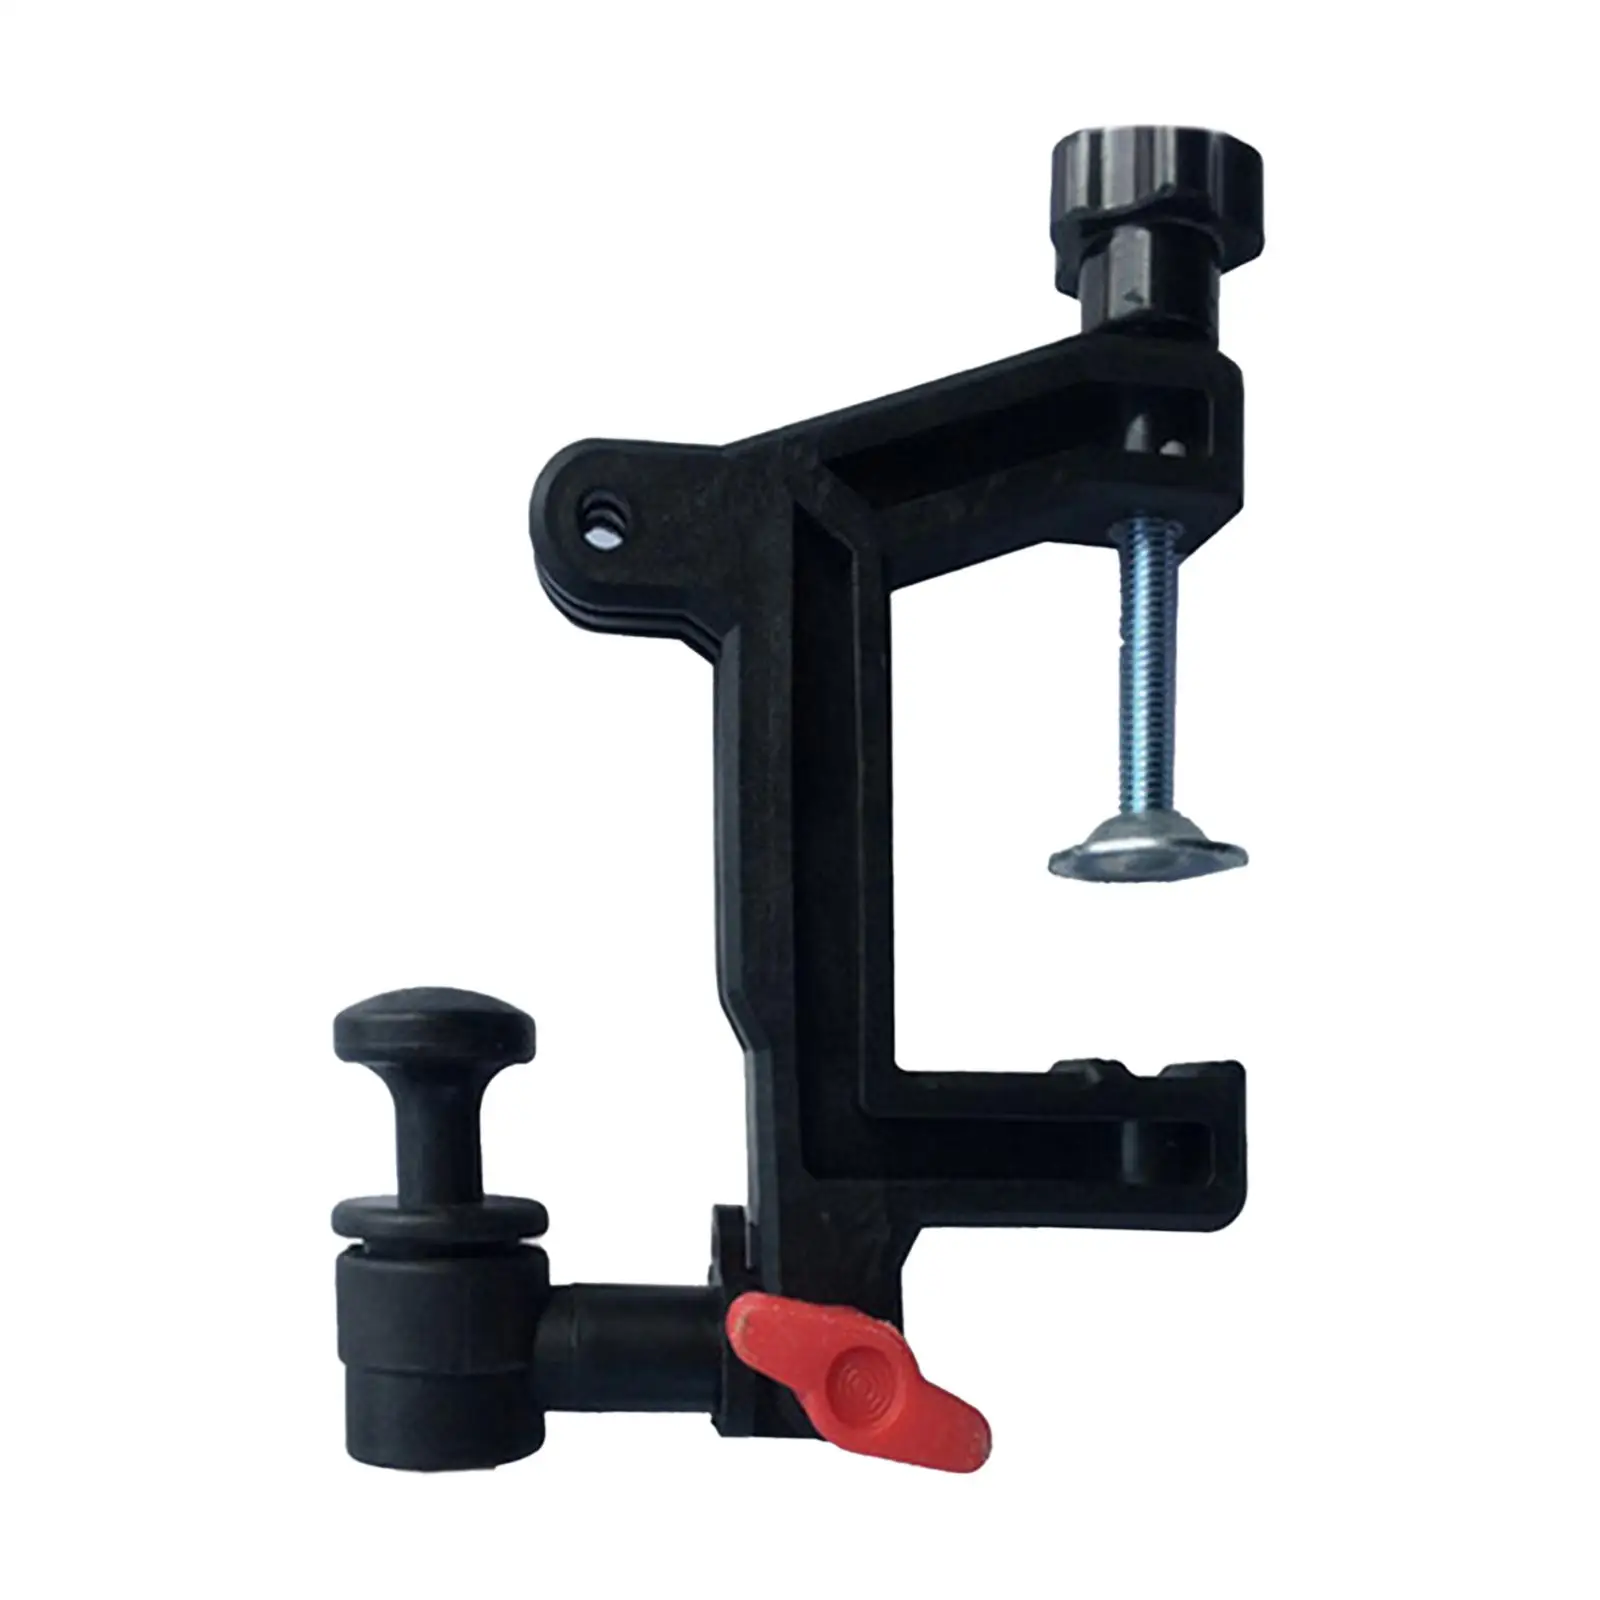 Transducer Bracket Fishing Finder Mount, Boat Accessories Fish Detector Rotatable Support Finding Device Mount Fish Finder Base